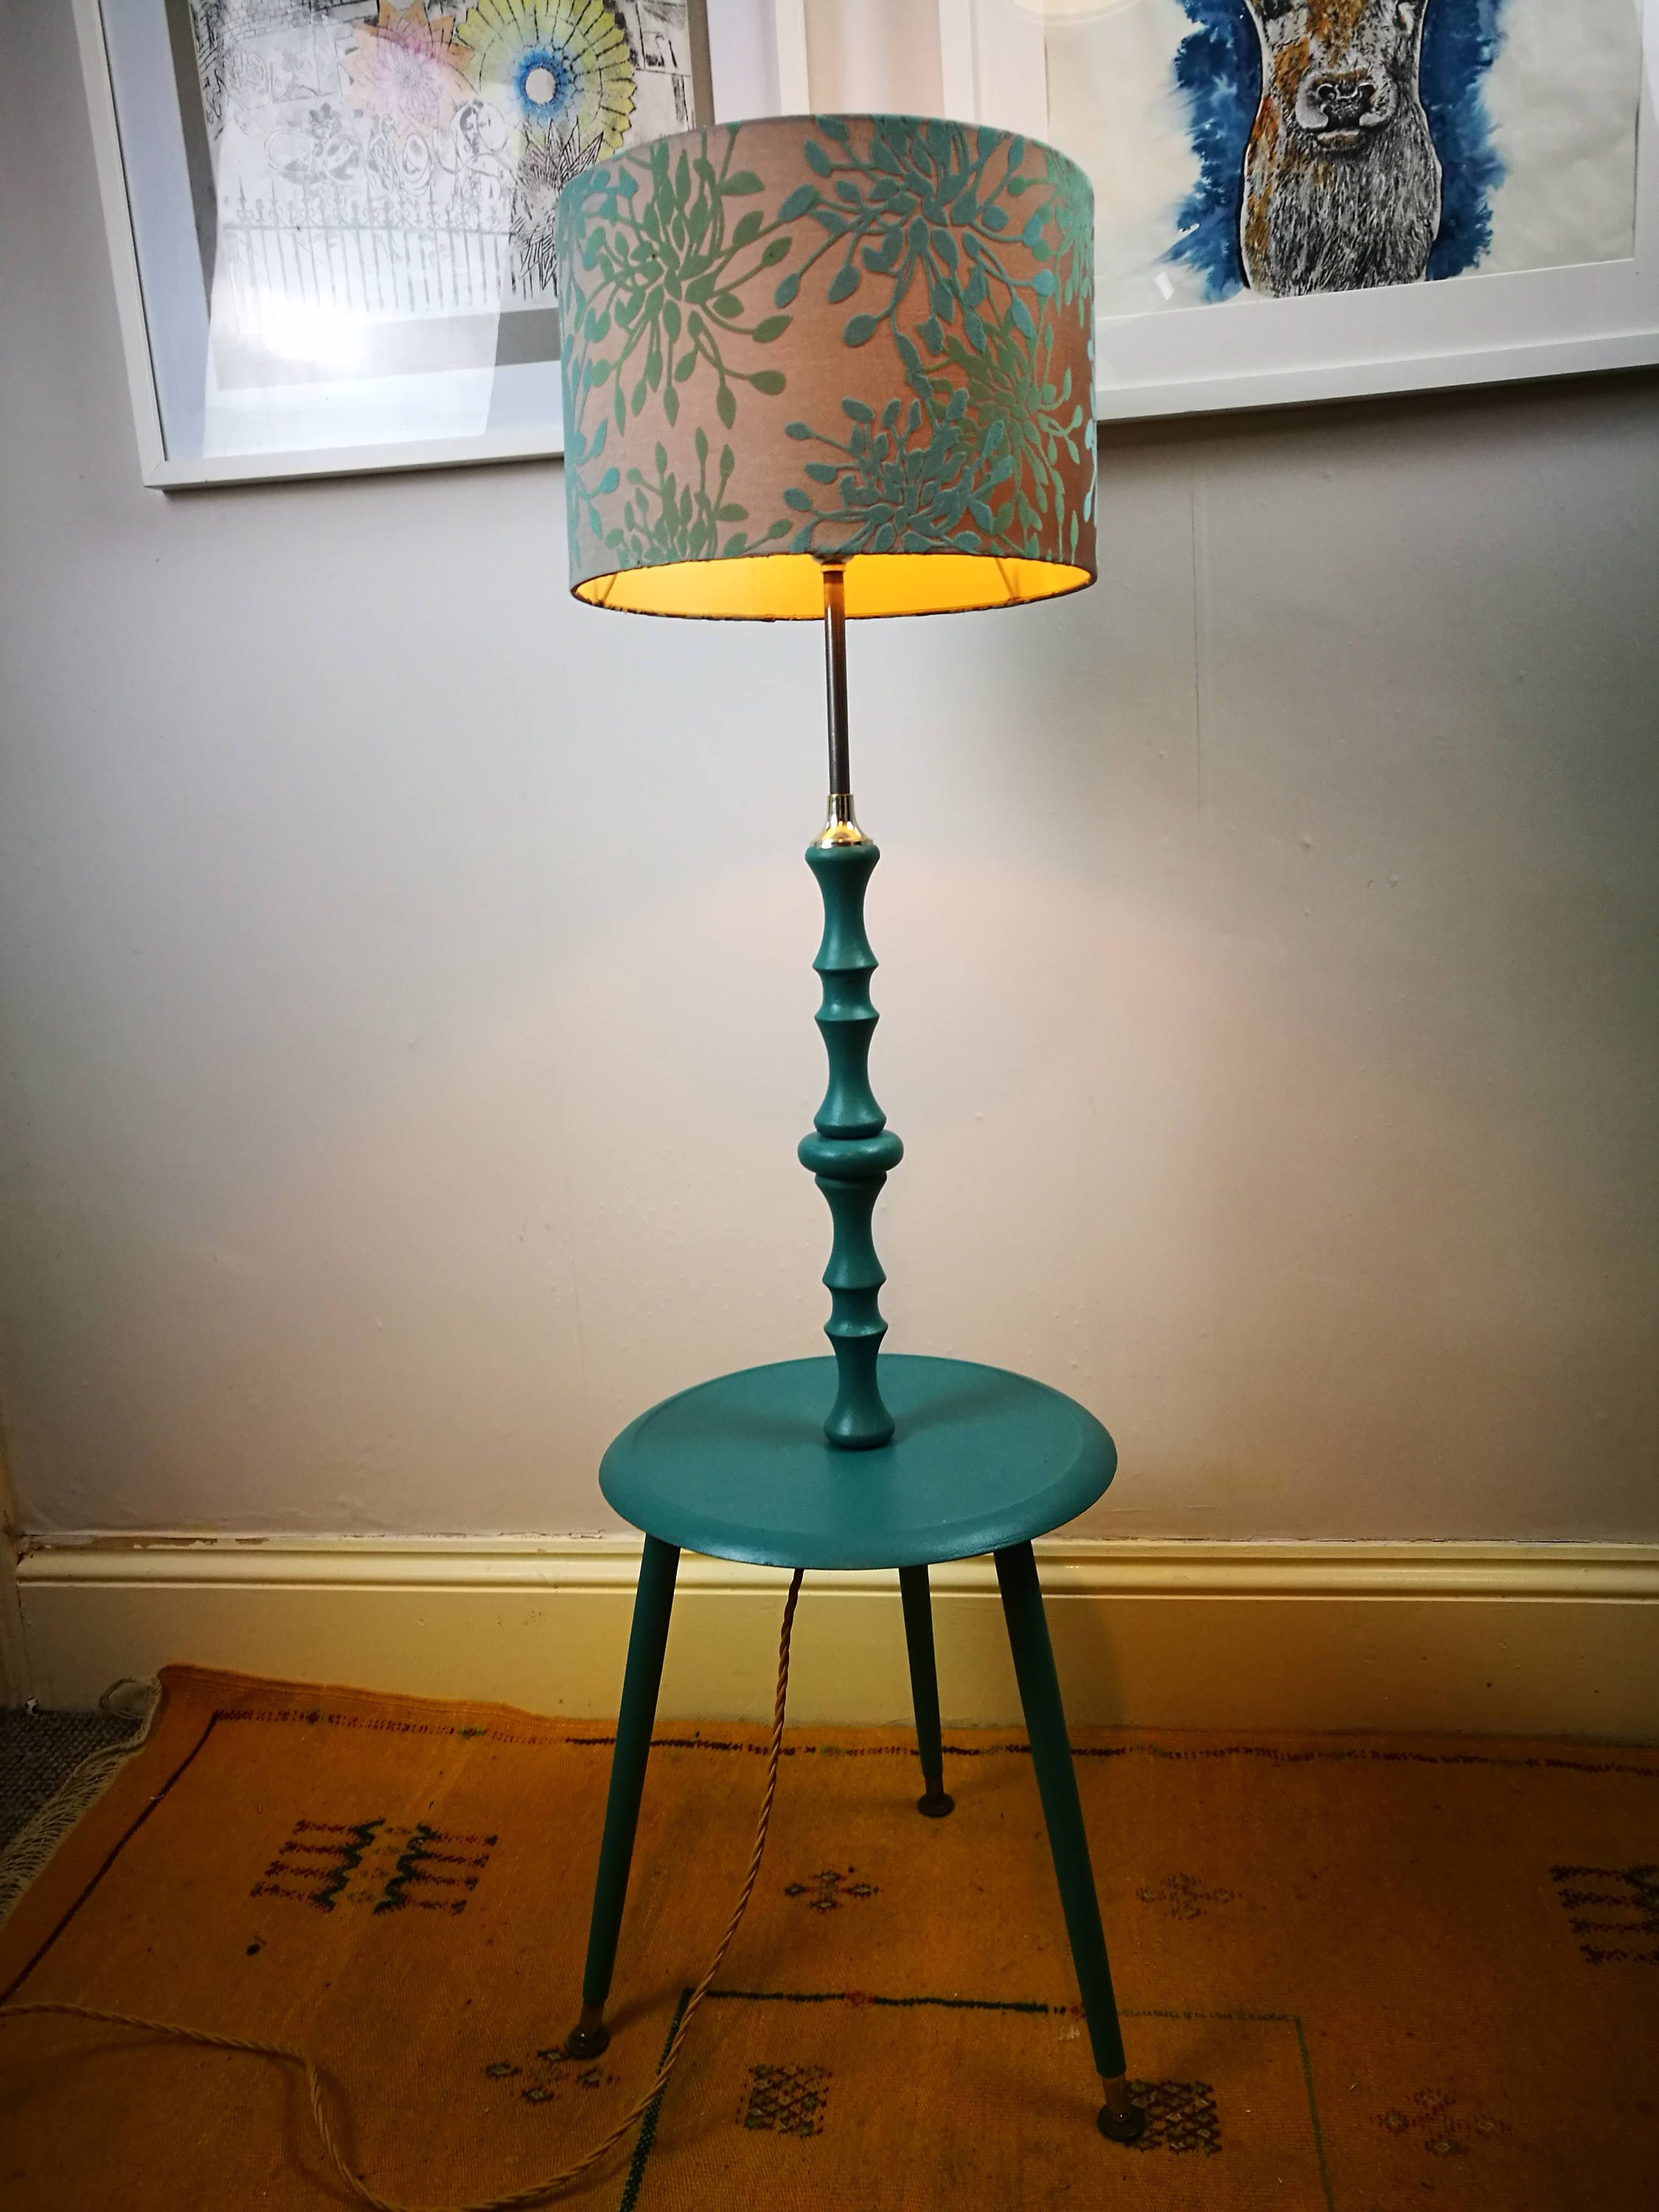 1960s Floor Lamp With Table Madeupsasha On Etsy with sizing 2250 X 3000